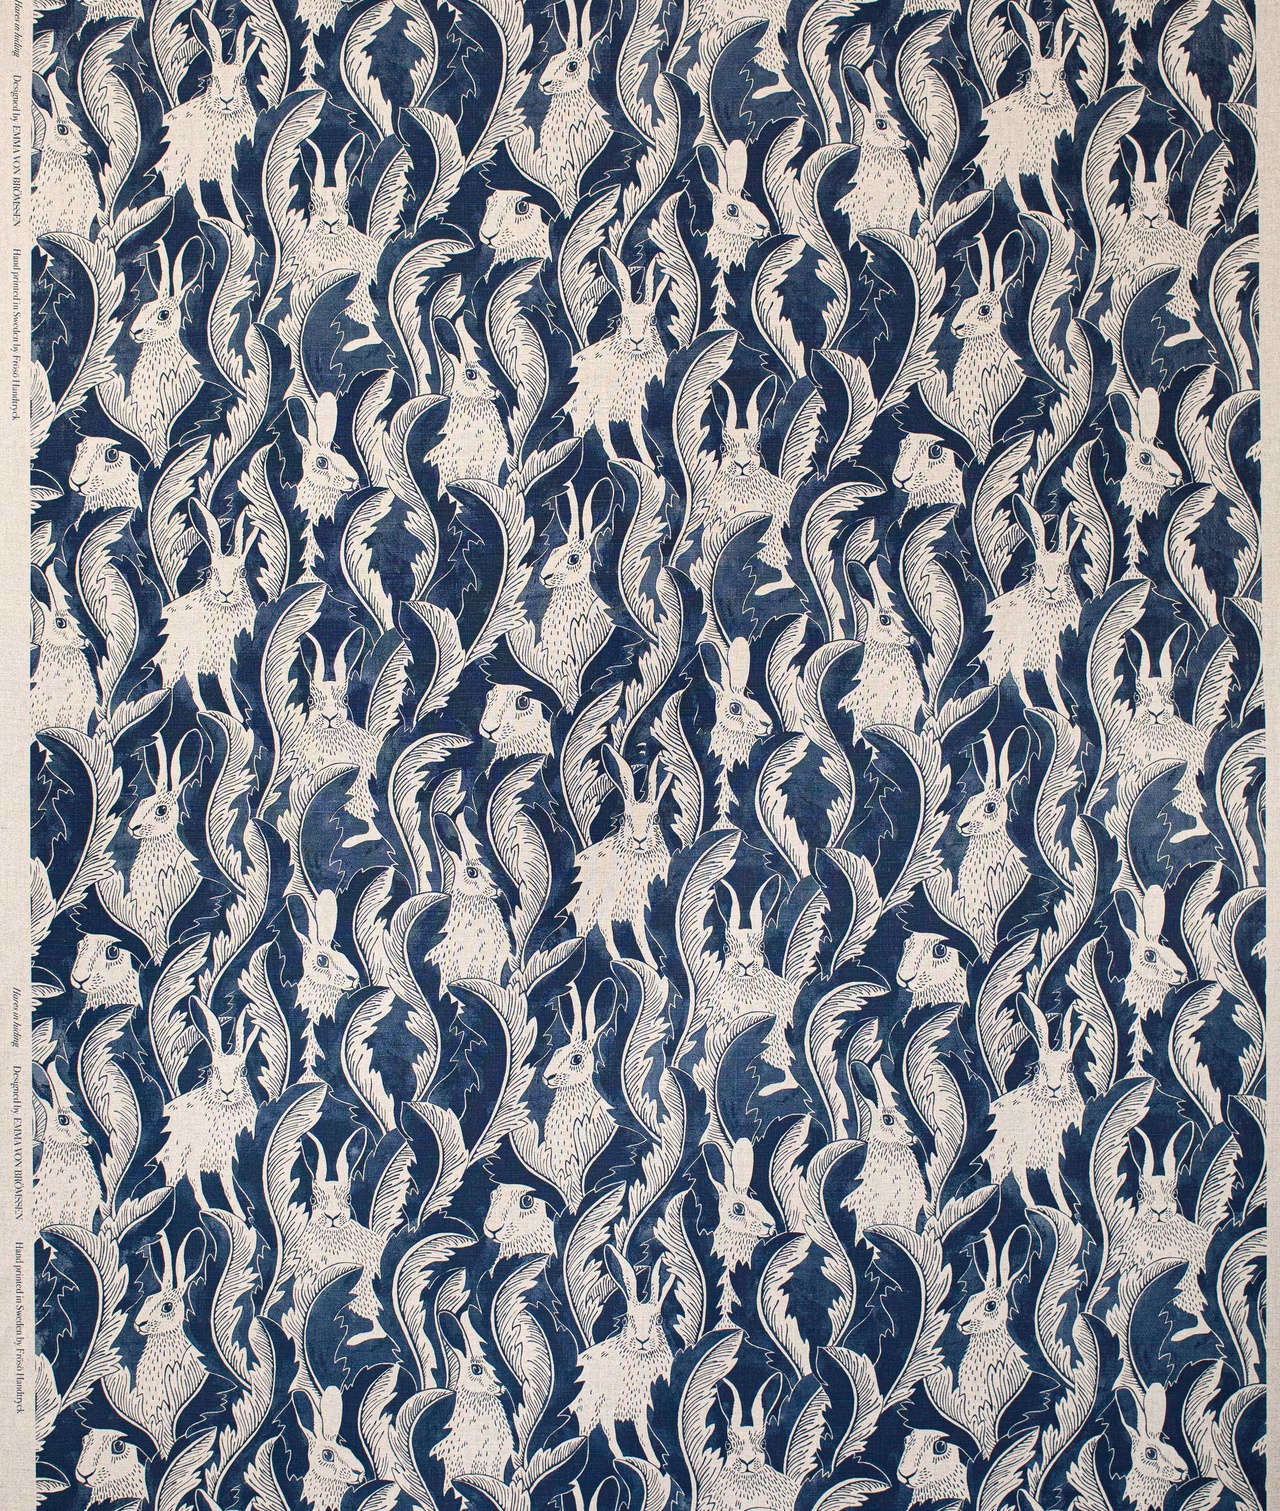 Sample Linen fabric "Hares in hiding"